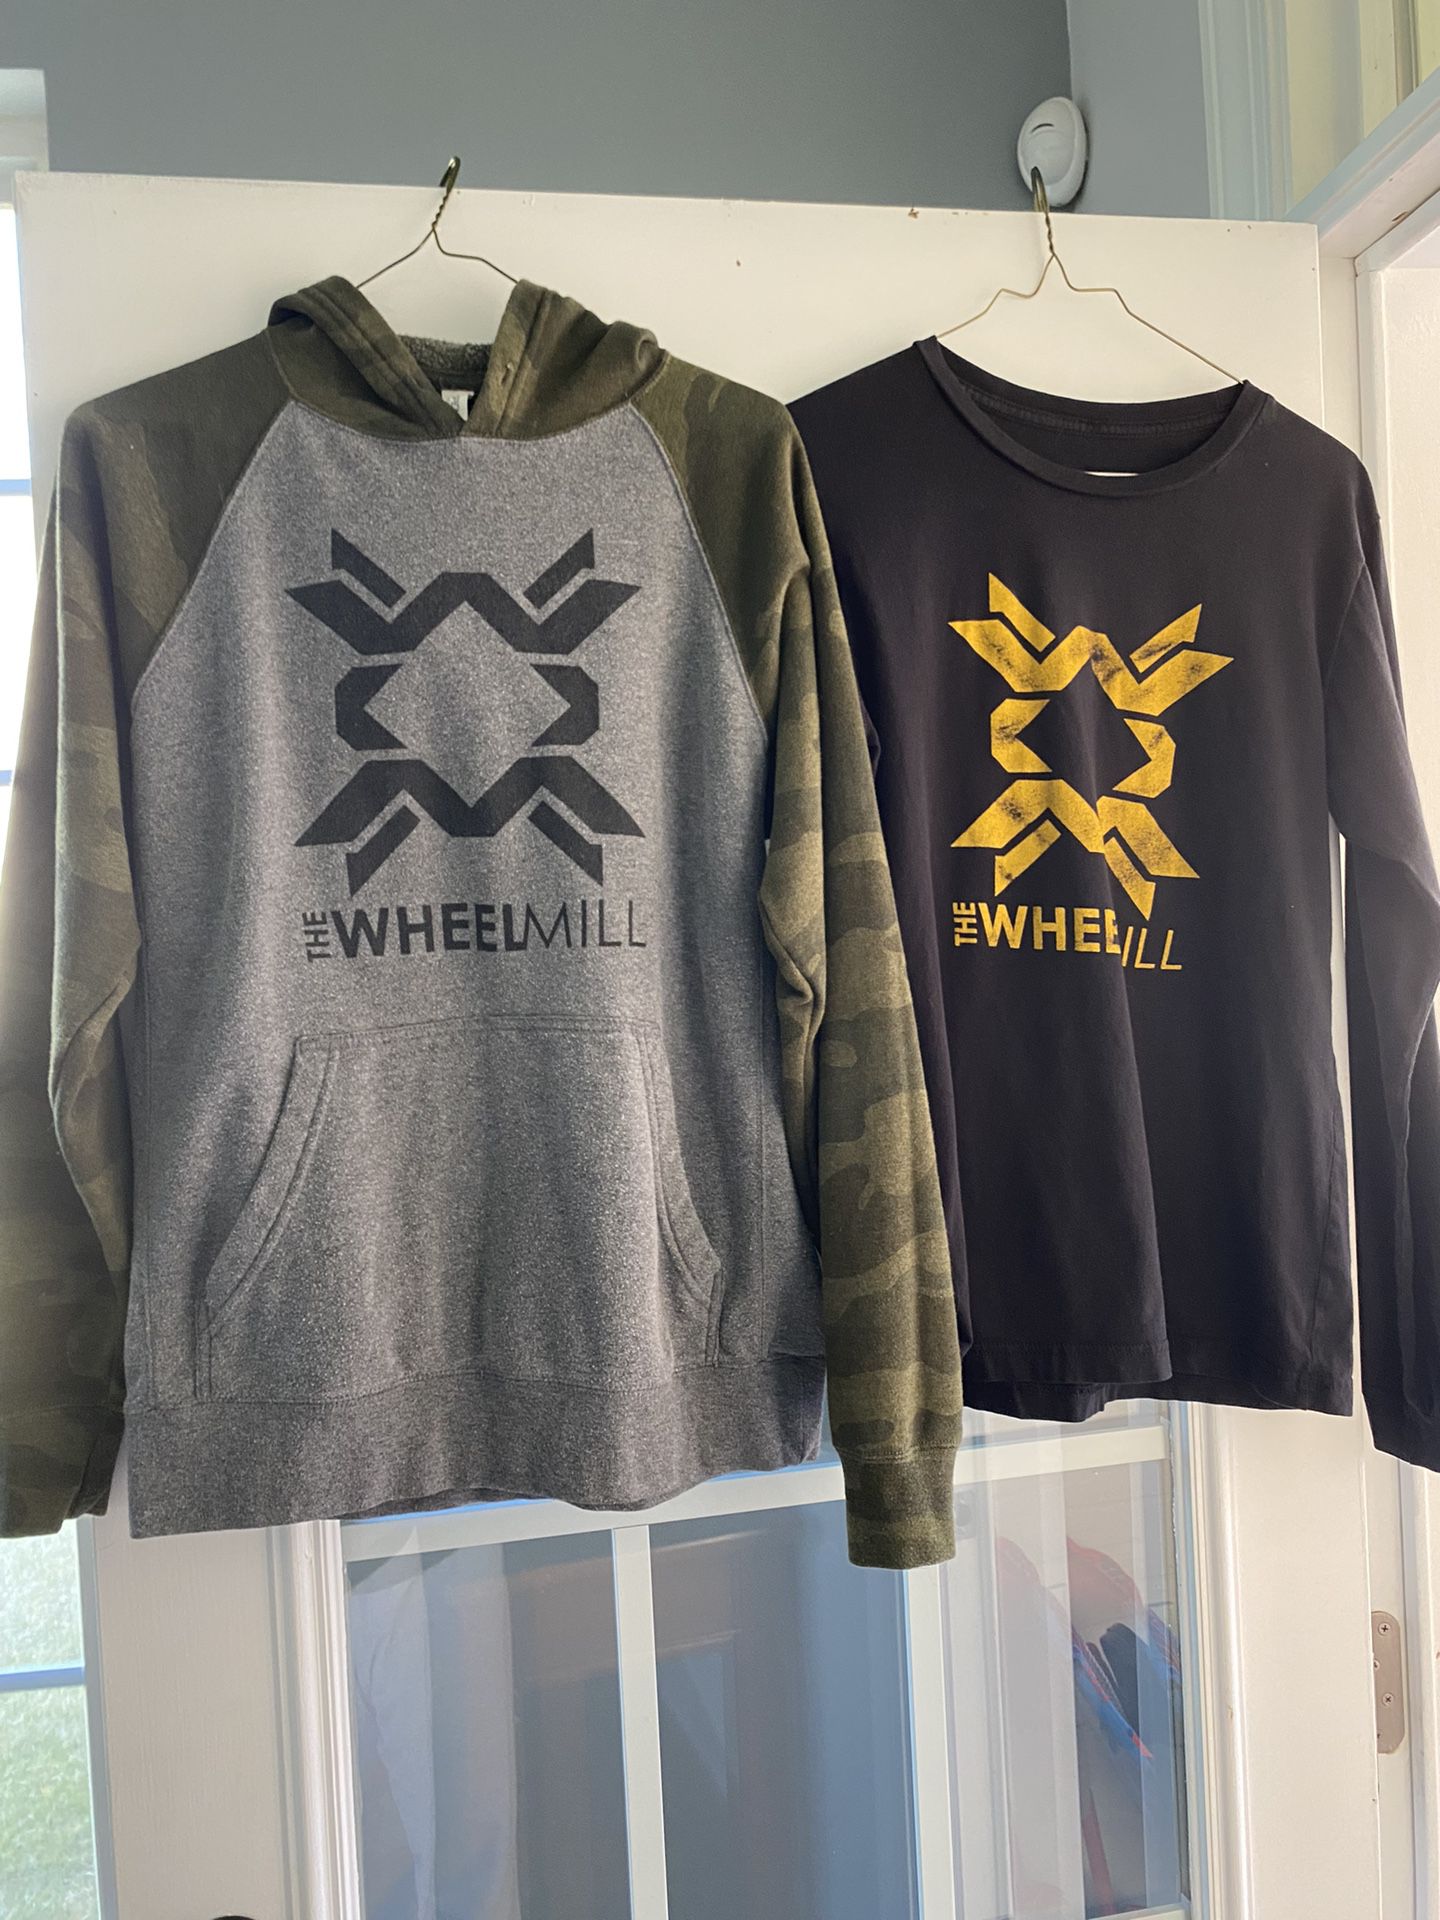 Wheelmill Branded Clothing - 2 Pieces Sold Together 